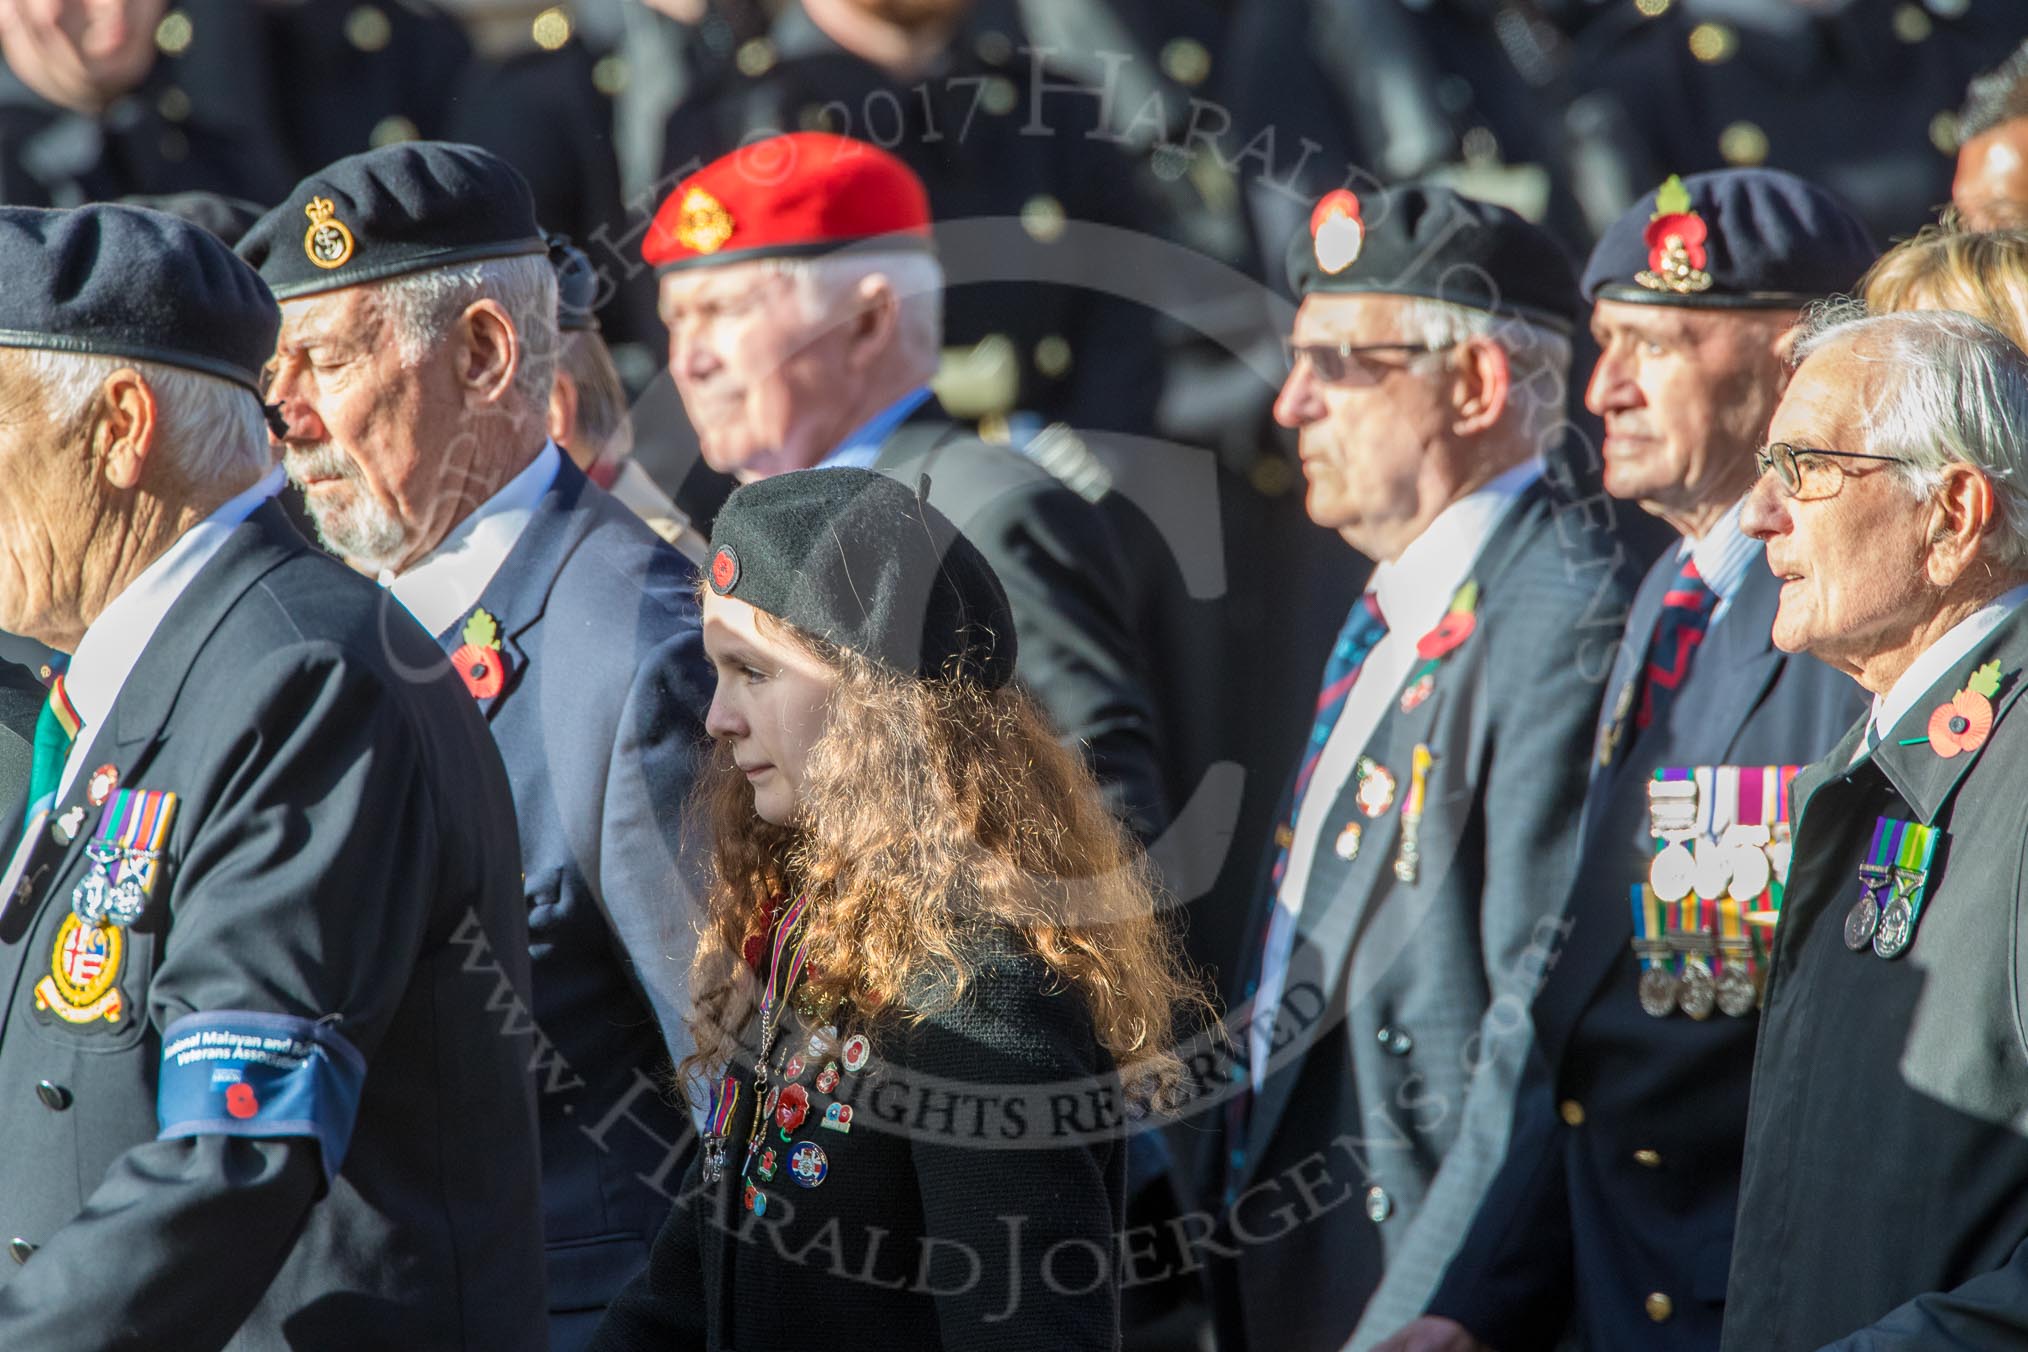 National Malay and Borneo Veterans Association  (Group F12, 76 members) during the Royal British Legion March Past on Remembrance Sunday at the Cenotaph, Whitehall, Westminster, London, 11 November 2018, 11:51.